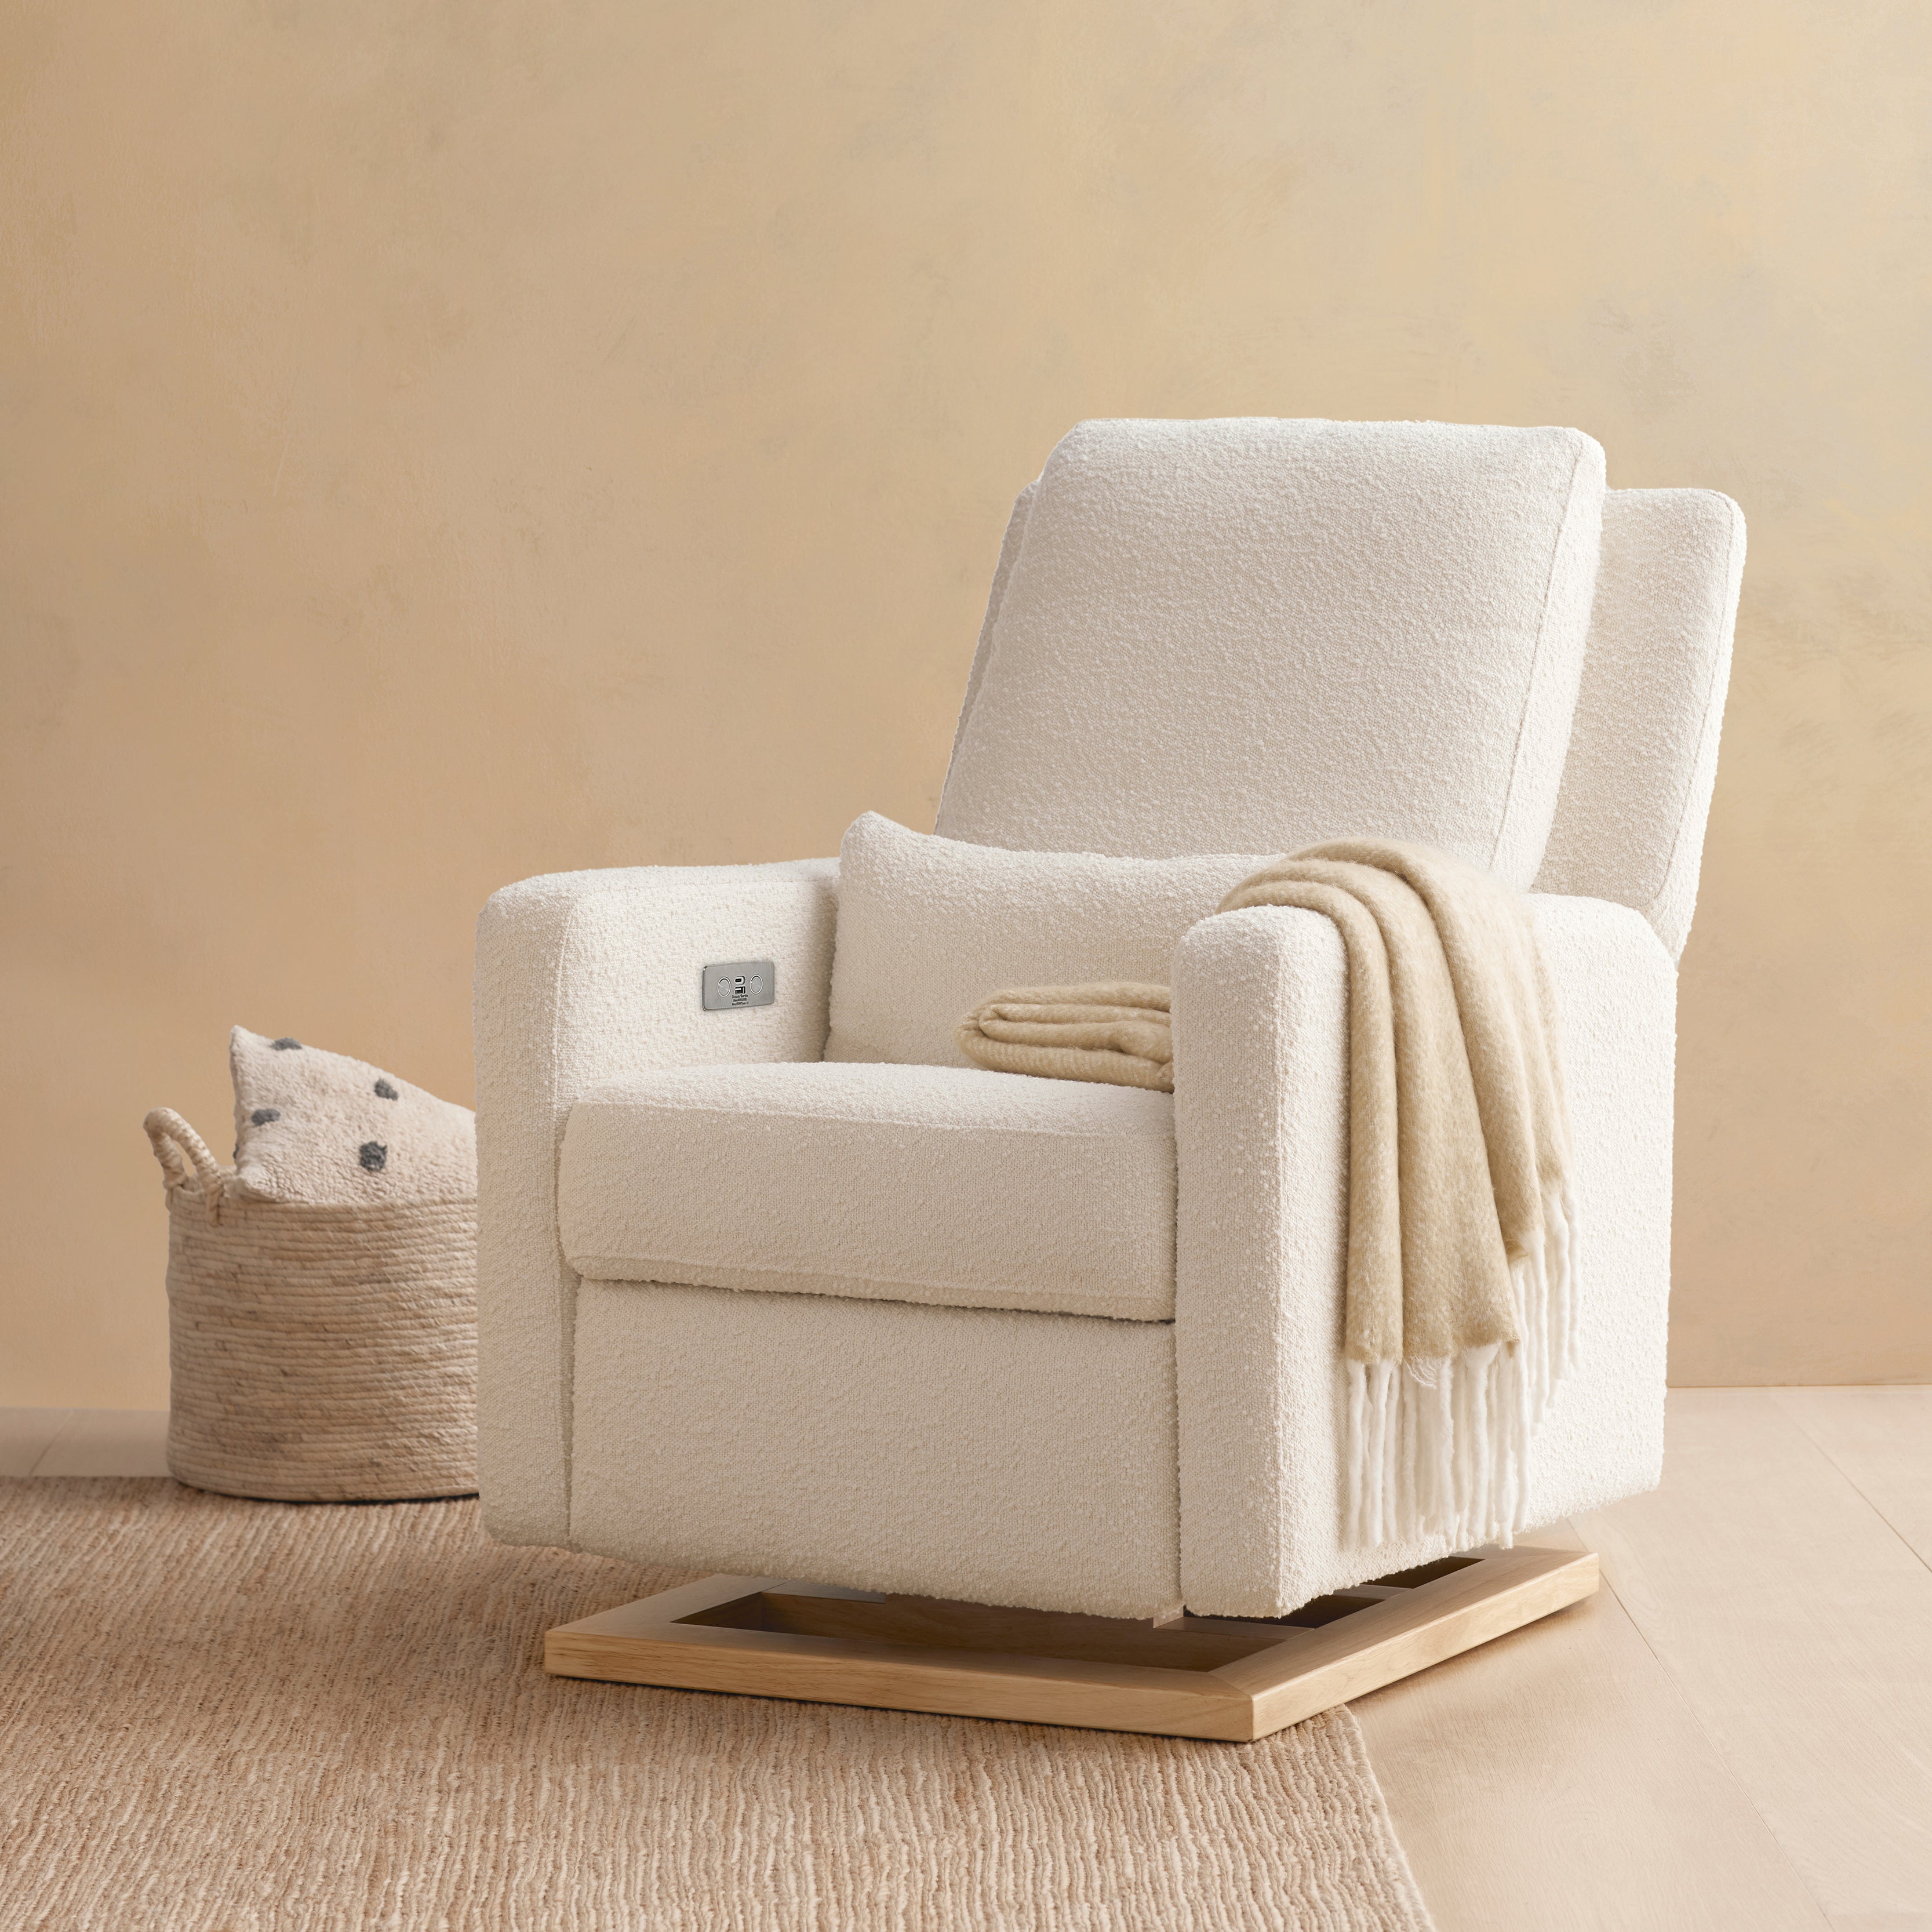 Sigi Electronic Recliner and Glider in Ivory Boucle with Light Wood Base - Twinkle Twinkle Little One